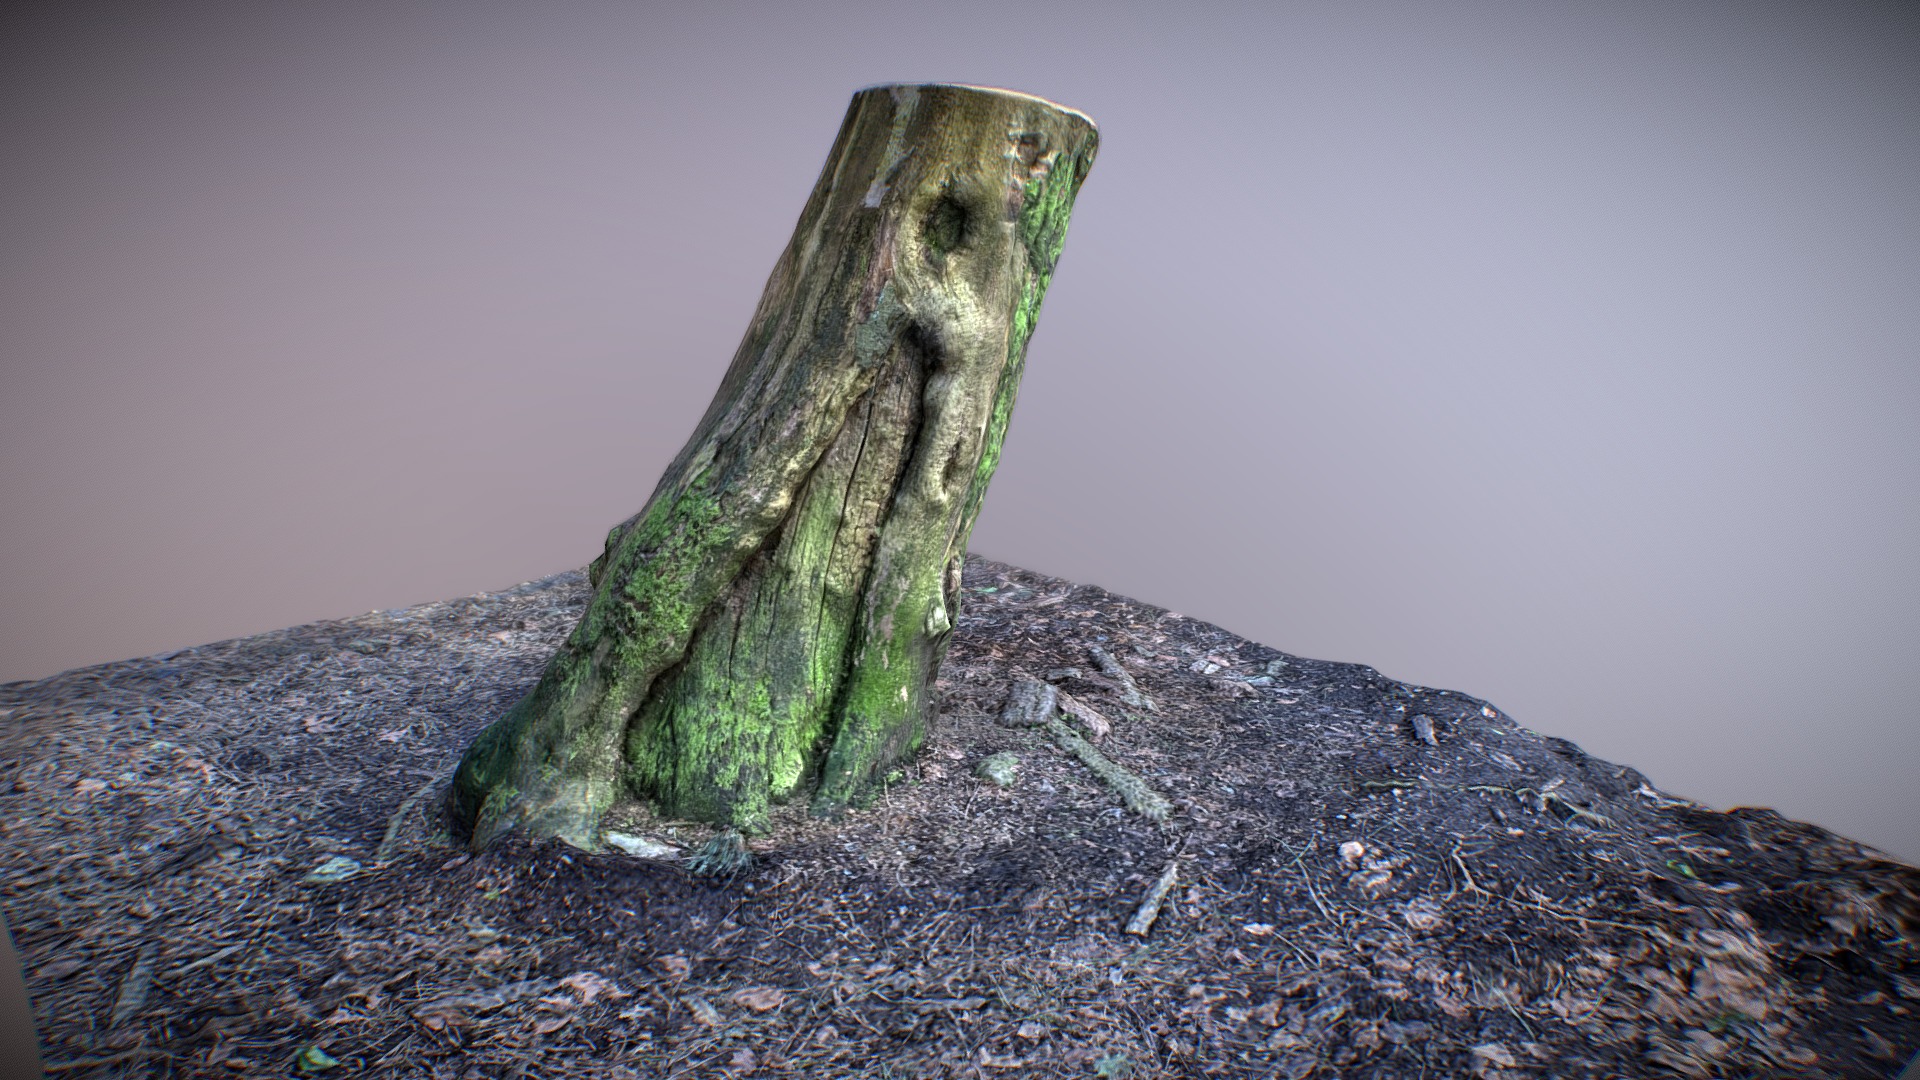 3D model Tree Trunk – 001 – Medium Poly – Maps 4096/4096 - This is a 3D model of the Tree Trunk - 001 - Medium Poly - Maps 4096/4096. The 3D model is about a rock on a rocky surface.